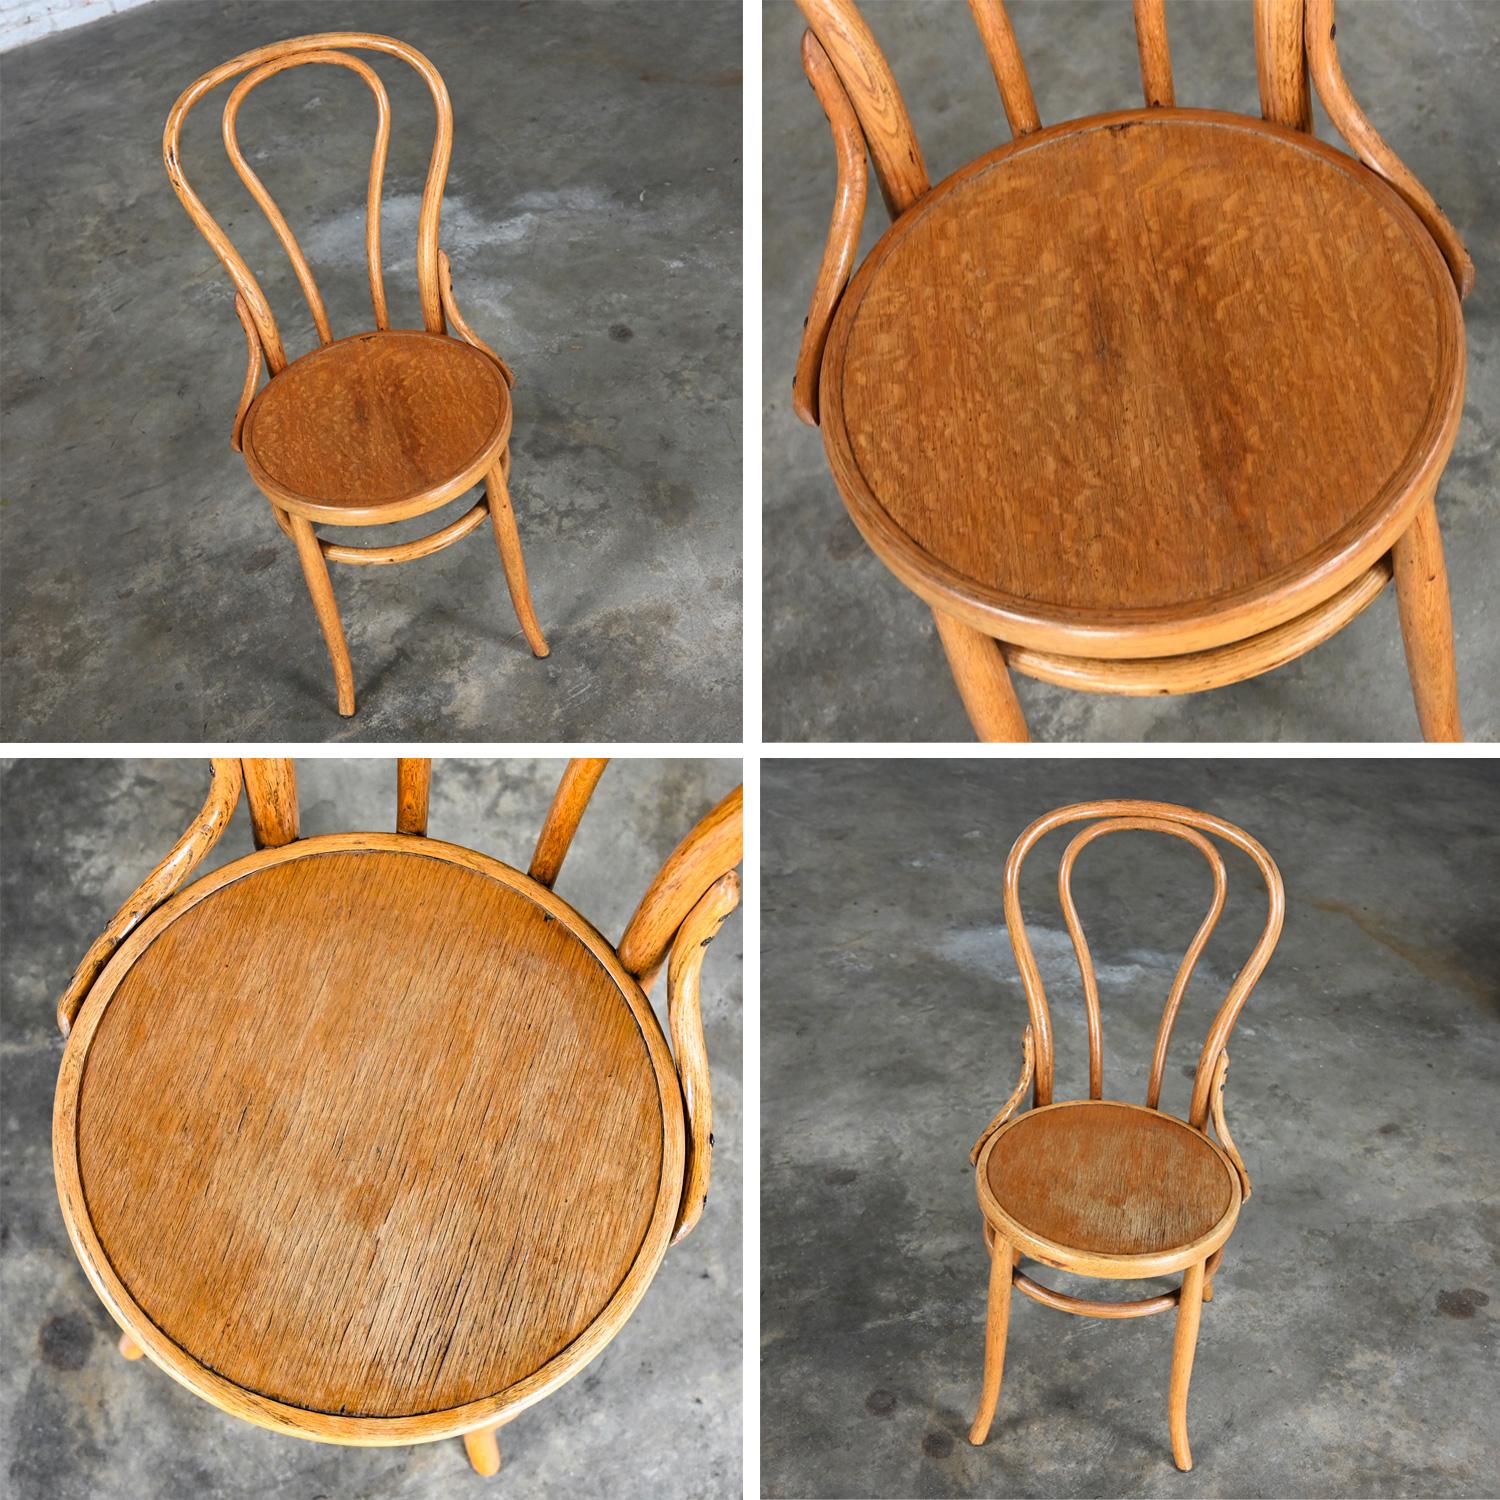 Bauhaus Oak Bentwood Chairs Attributed to Thonet #18 Café Chair Set of 6 For Sale 2